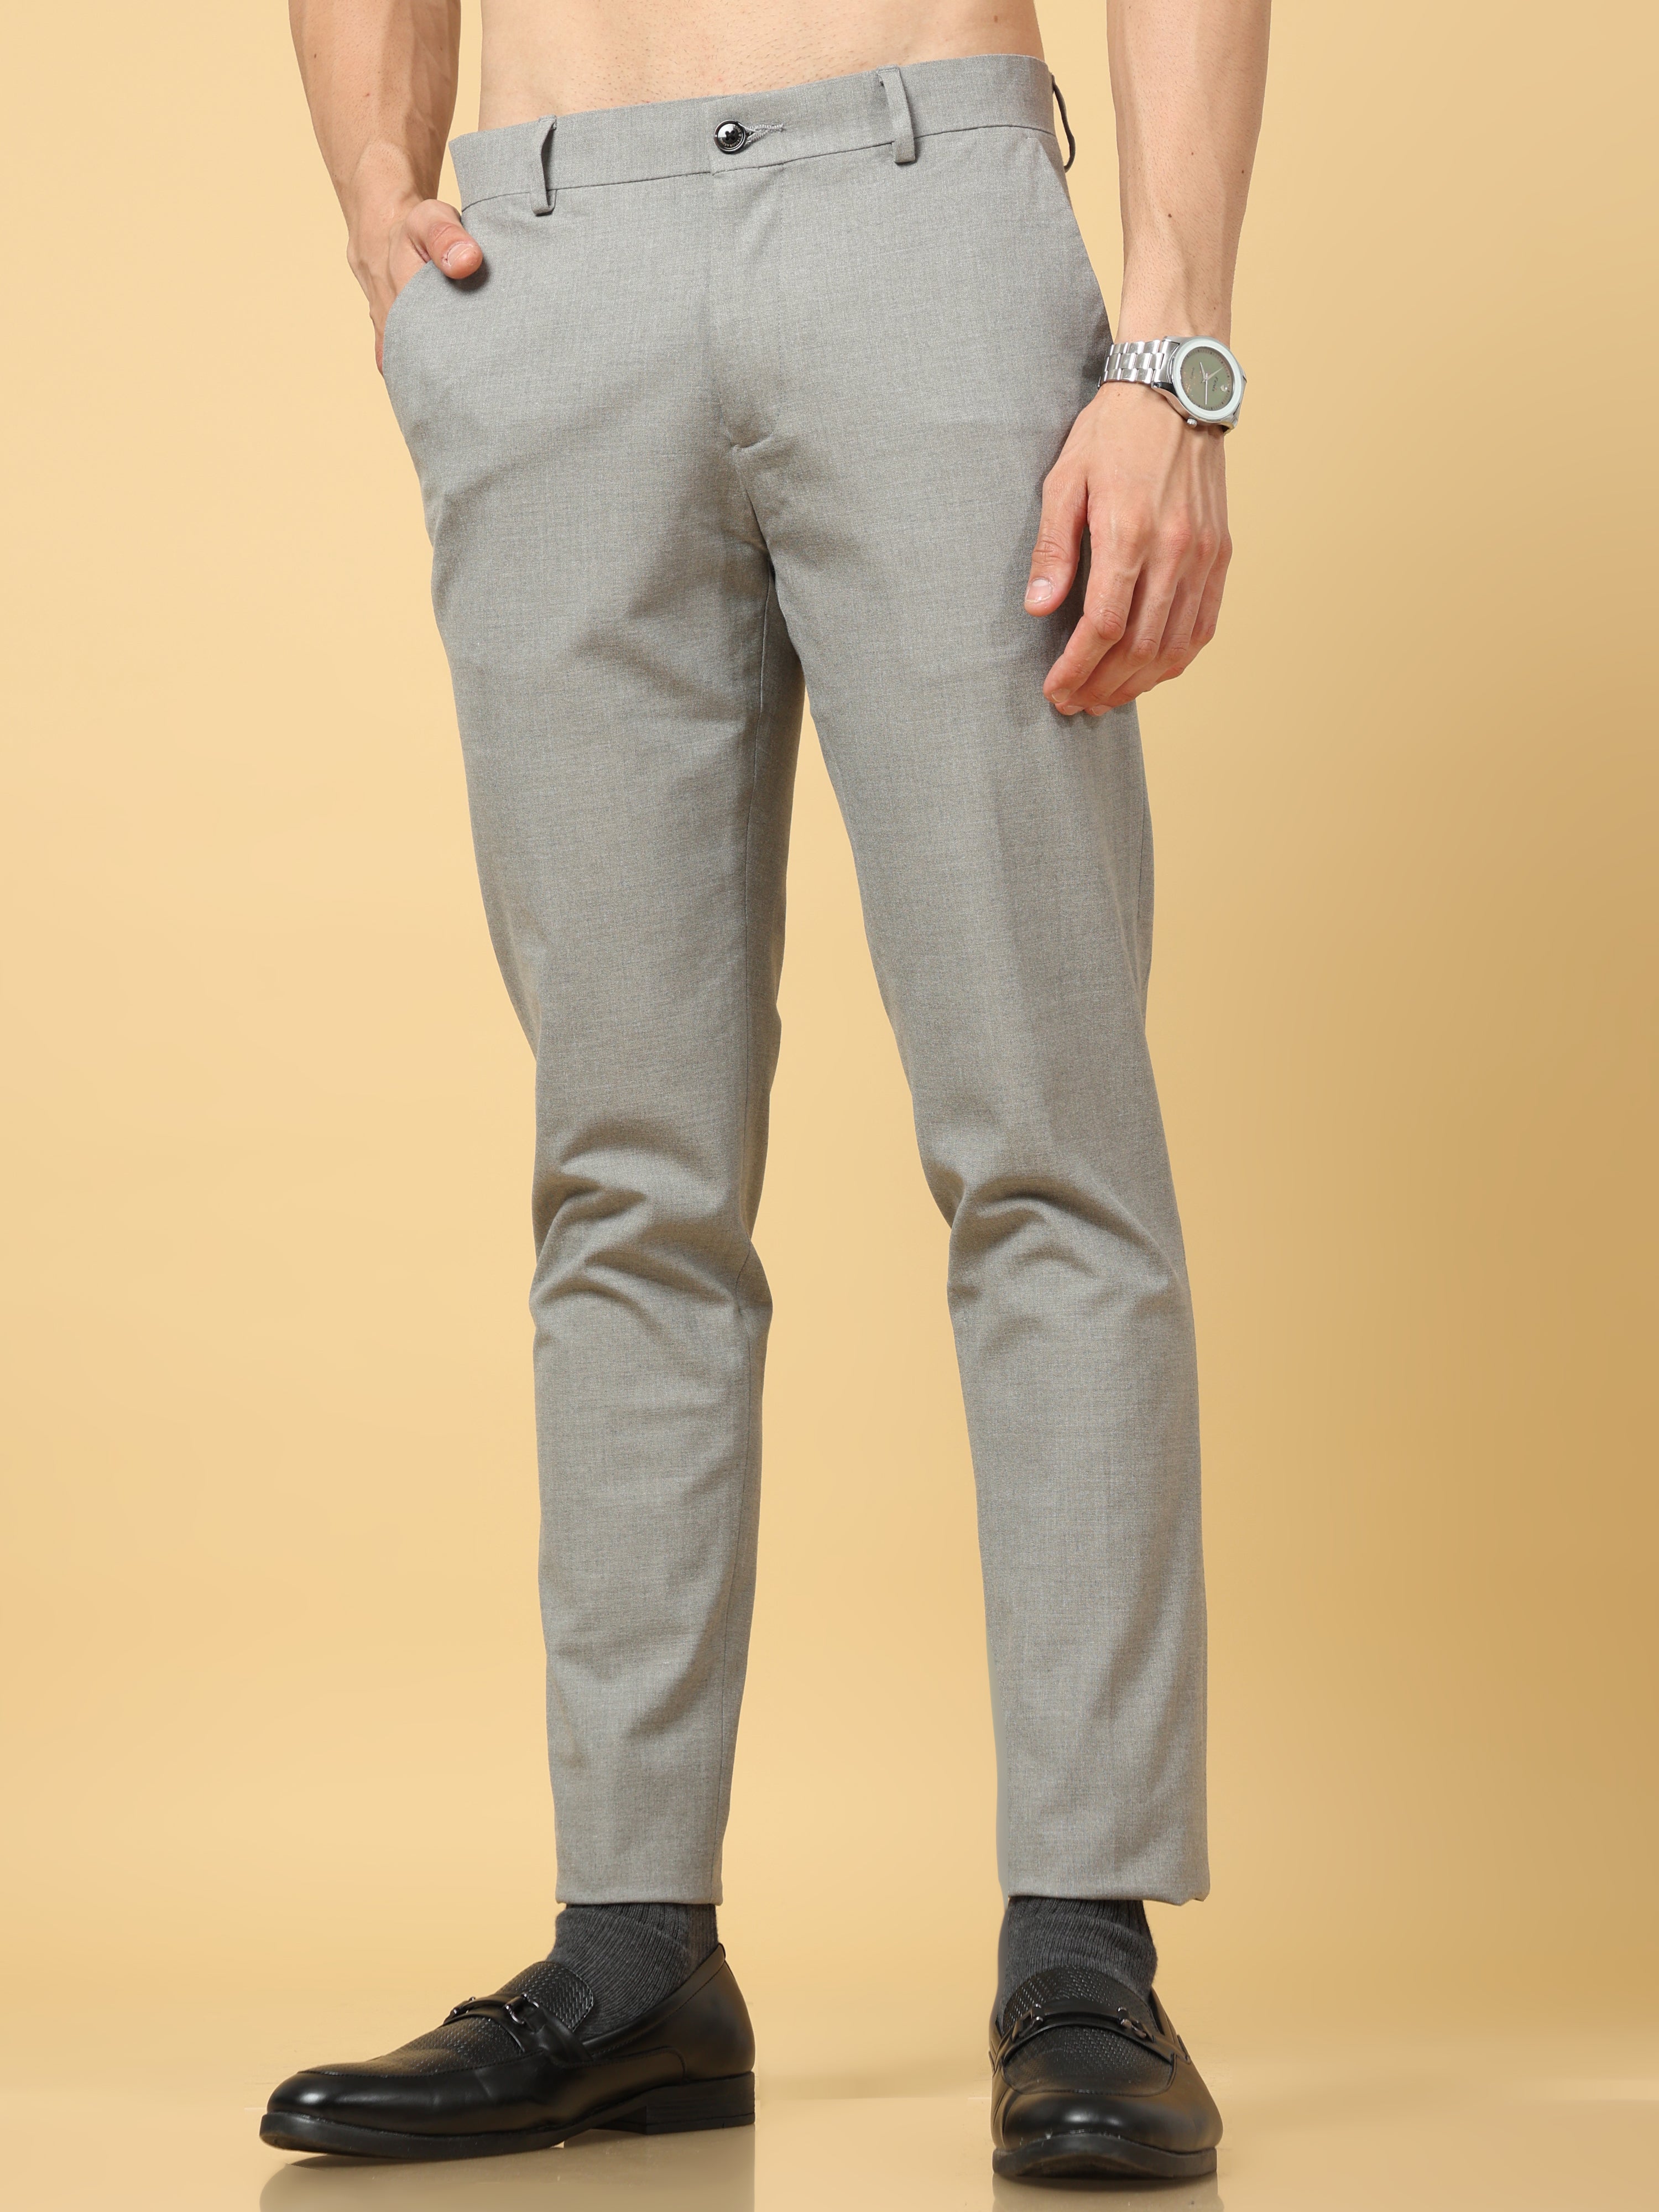 Light Grey Textured Ankle-Length Formal Men Carrot Fit Trousers - Selling  Fast at Pantaloons.com